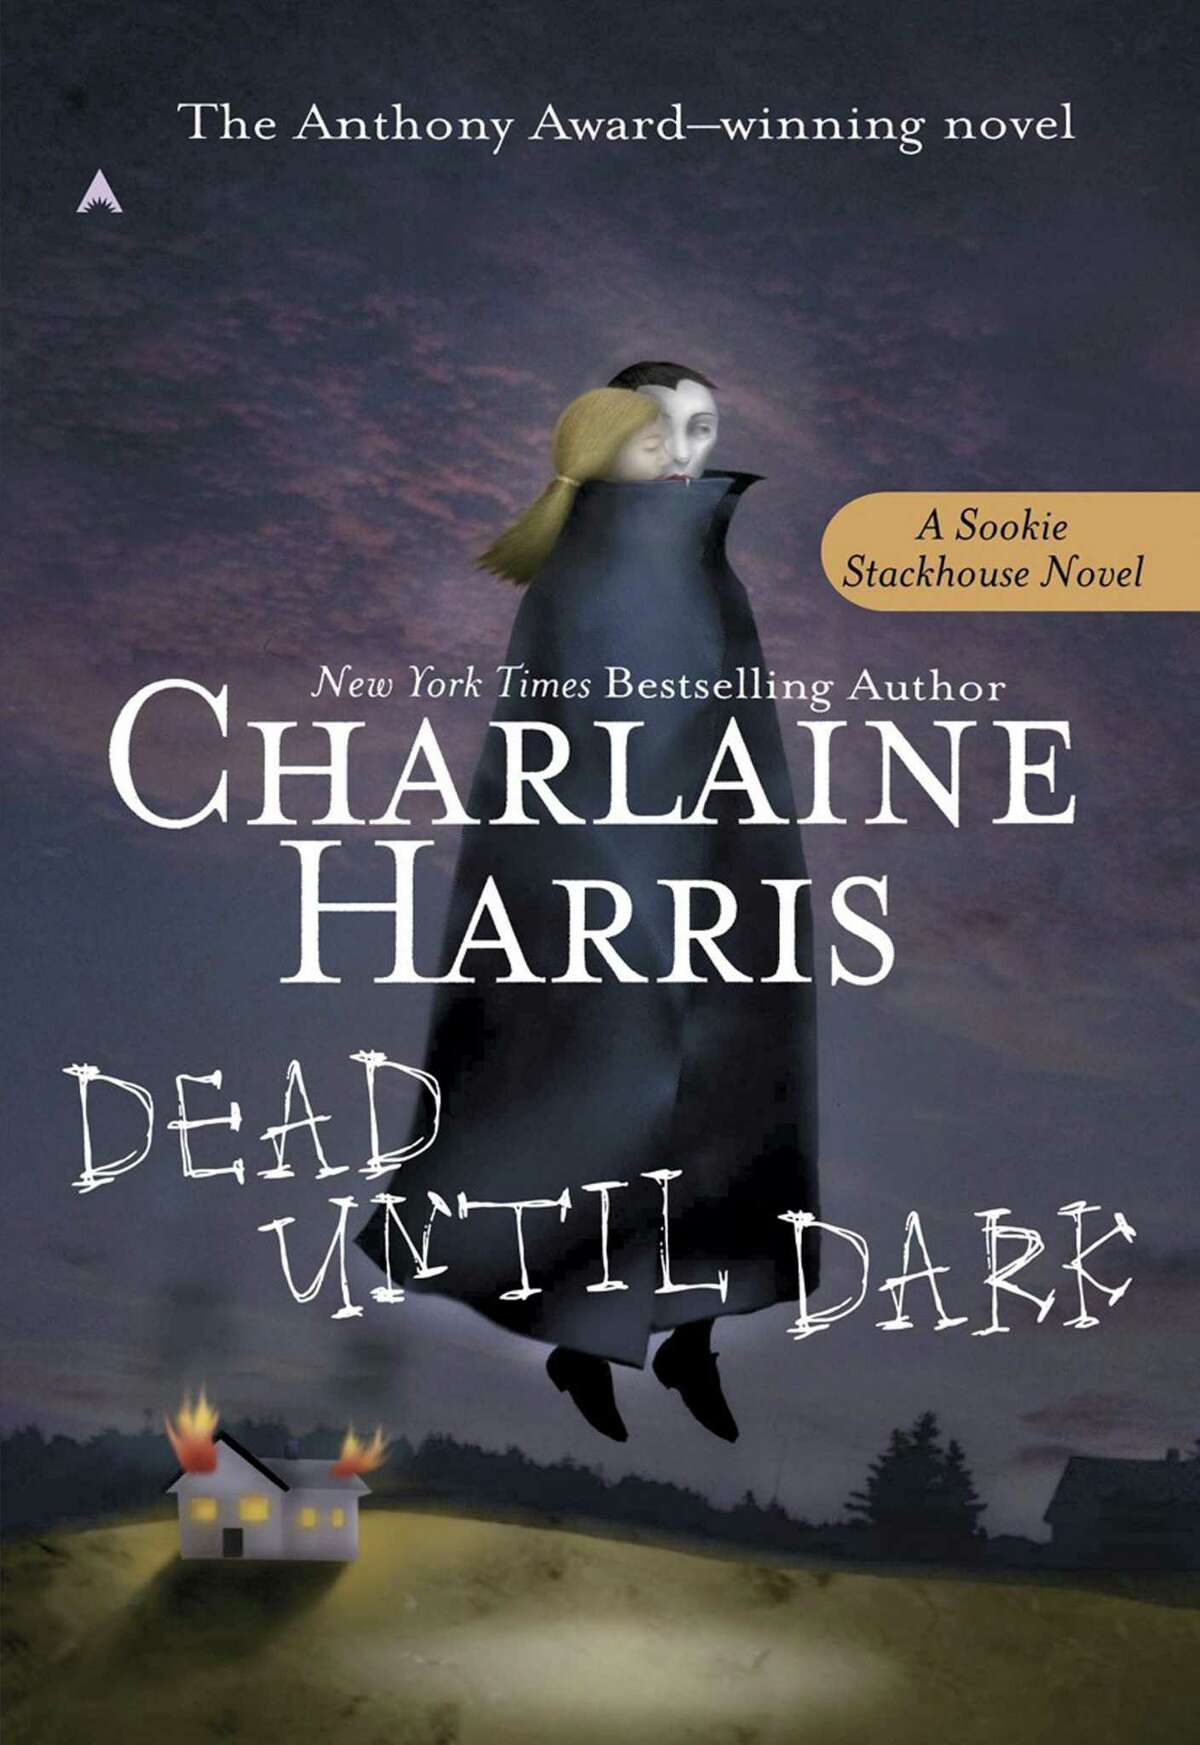 Charlaine Harris' hit Southern Vampire Mysteries started with the novel ‘Dead Until Dark.’ The books inspired the hit HBO series, ‘True Blood.’